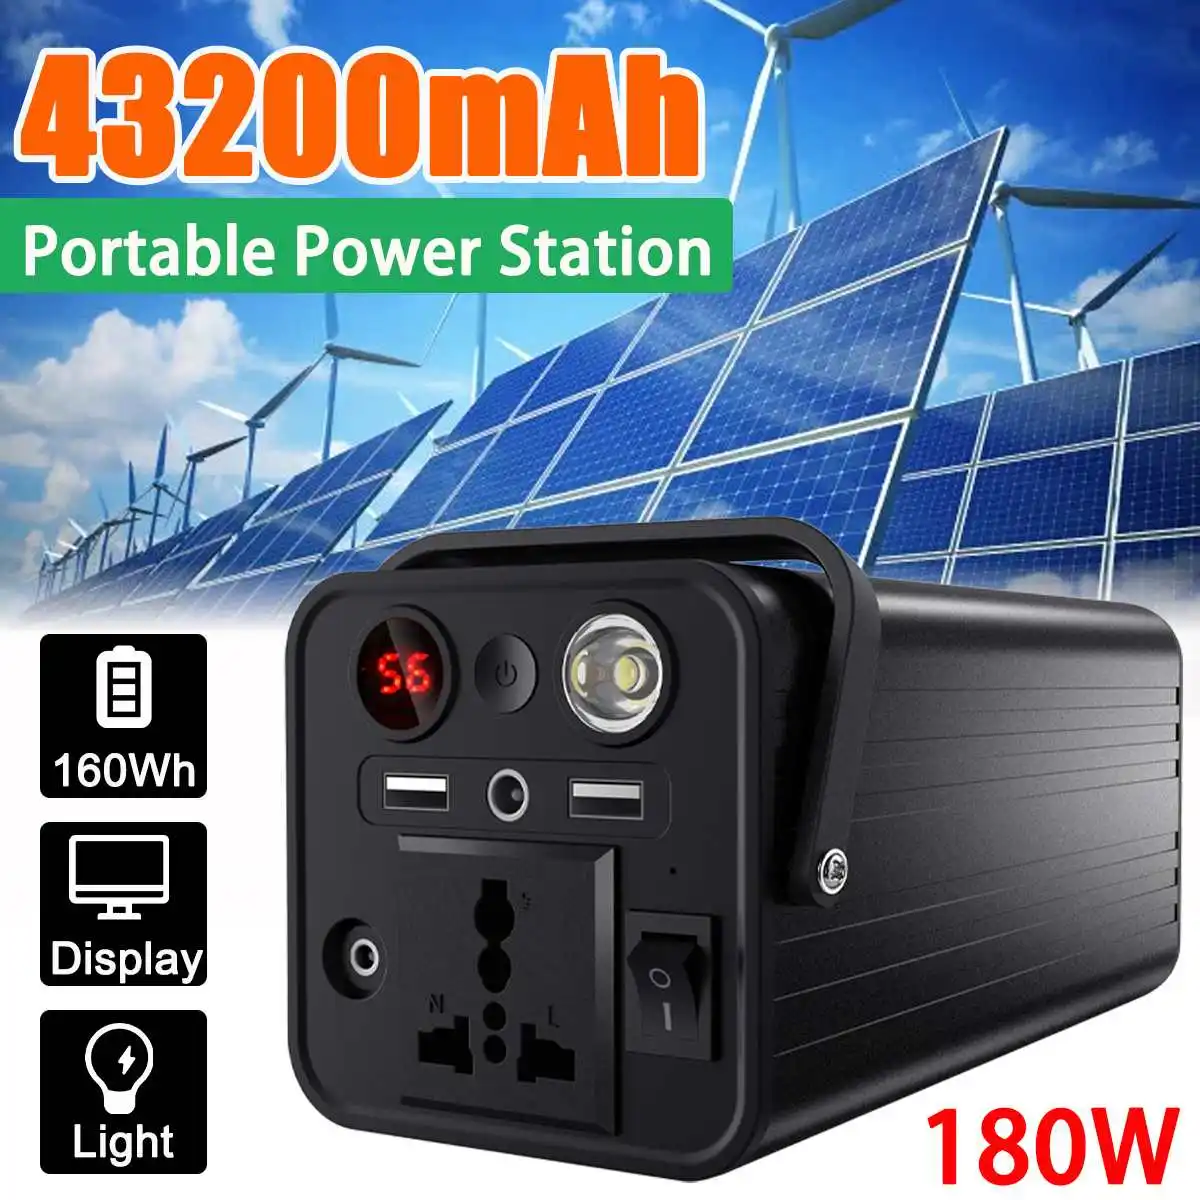 

110V Portable Solar Power Station 43200mAh Solar Generator Li-ion Battery Charger Outdoor Energy Power Supply 180W 160WH